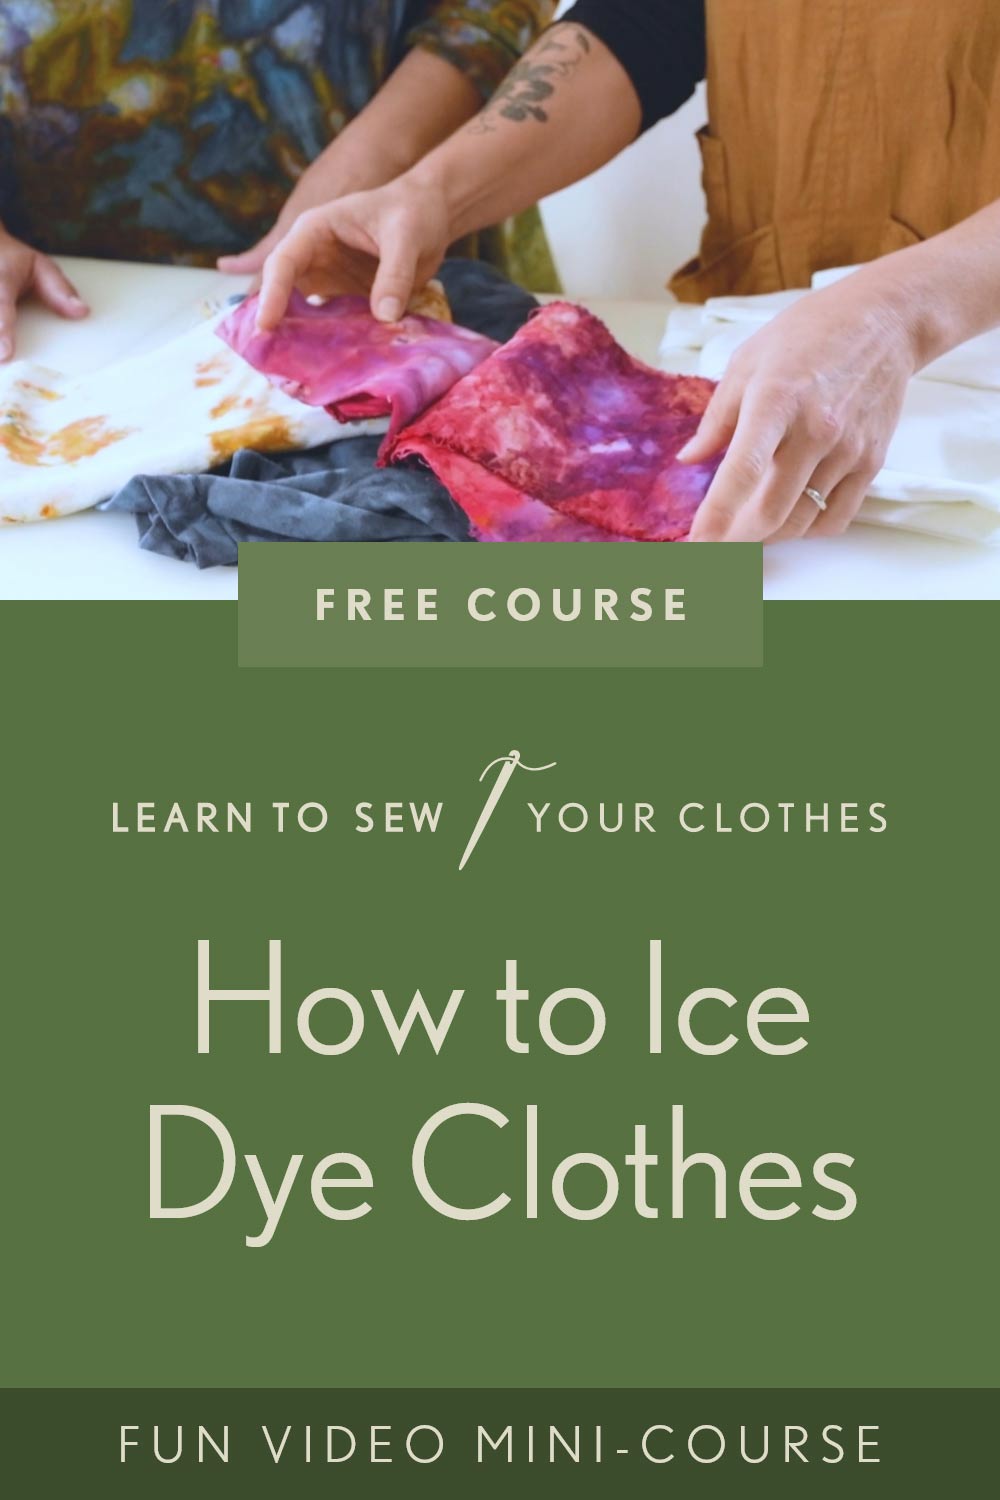 How to Ice Dye Clothes mini course, featuring samples of ice dyed fabrics